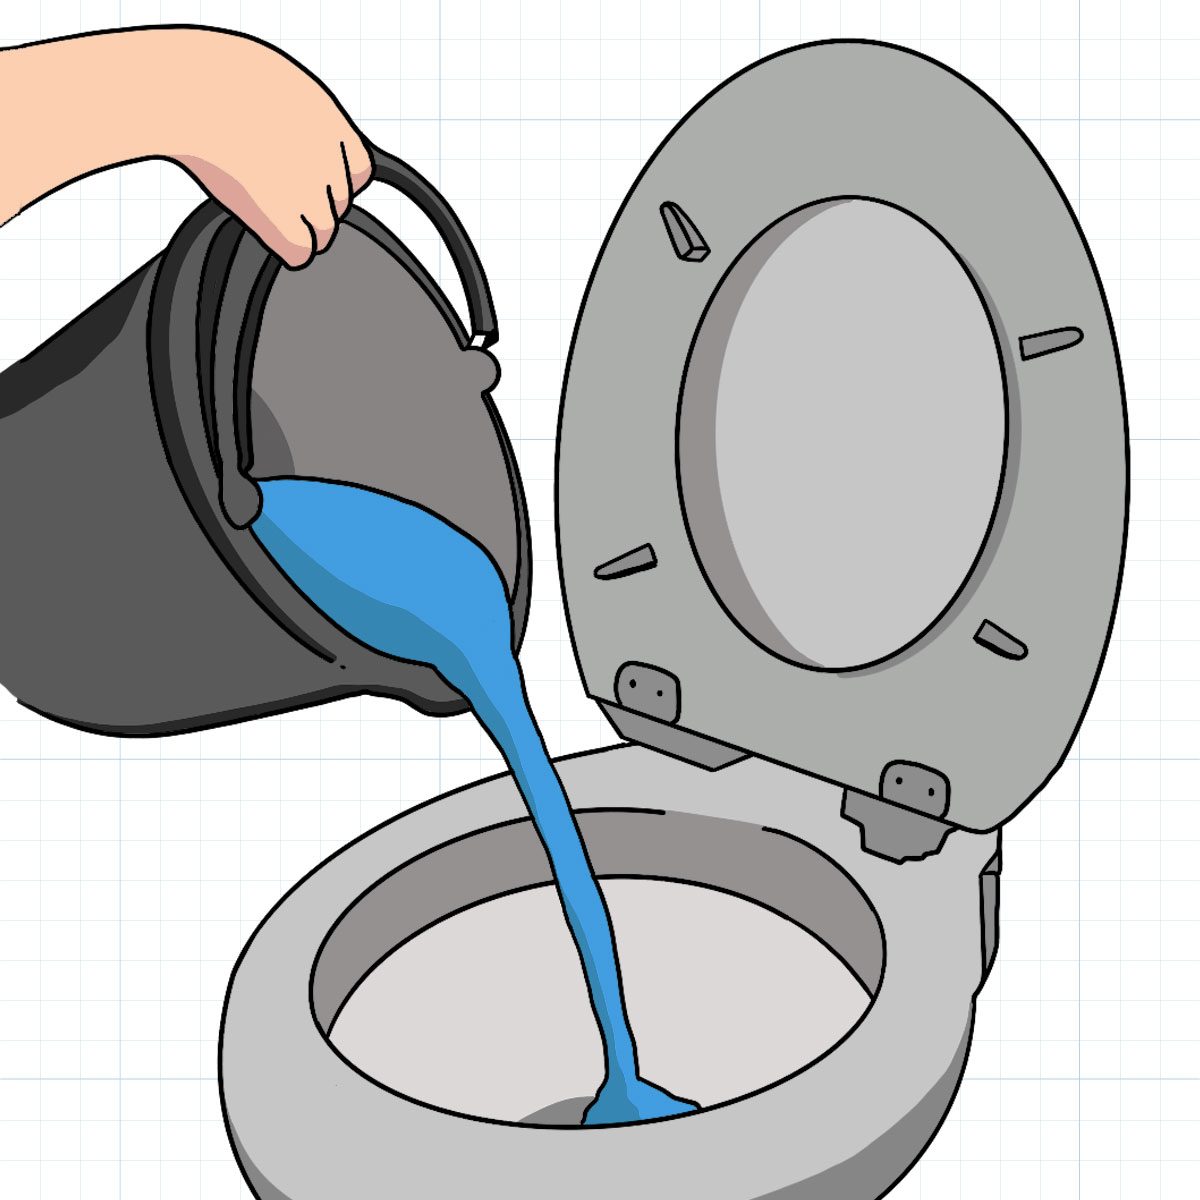 How To Unclog A Toilet Without A Plunger by Adding Hot Water